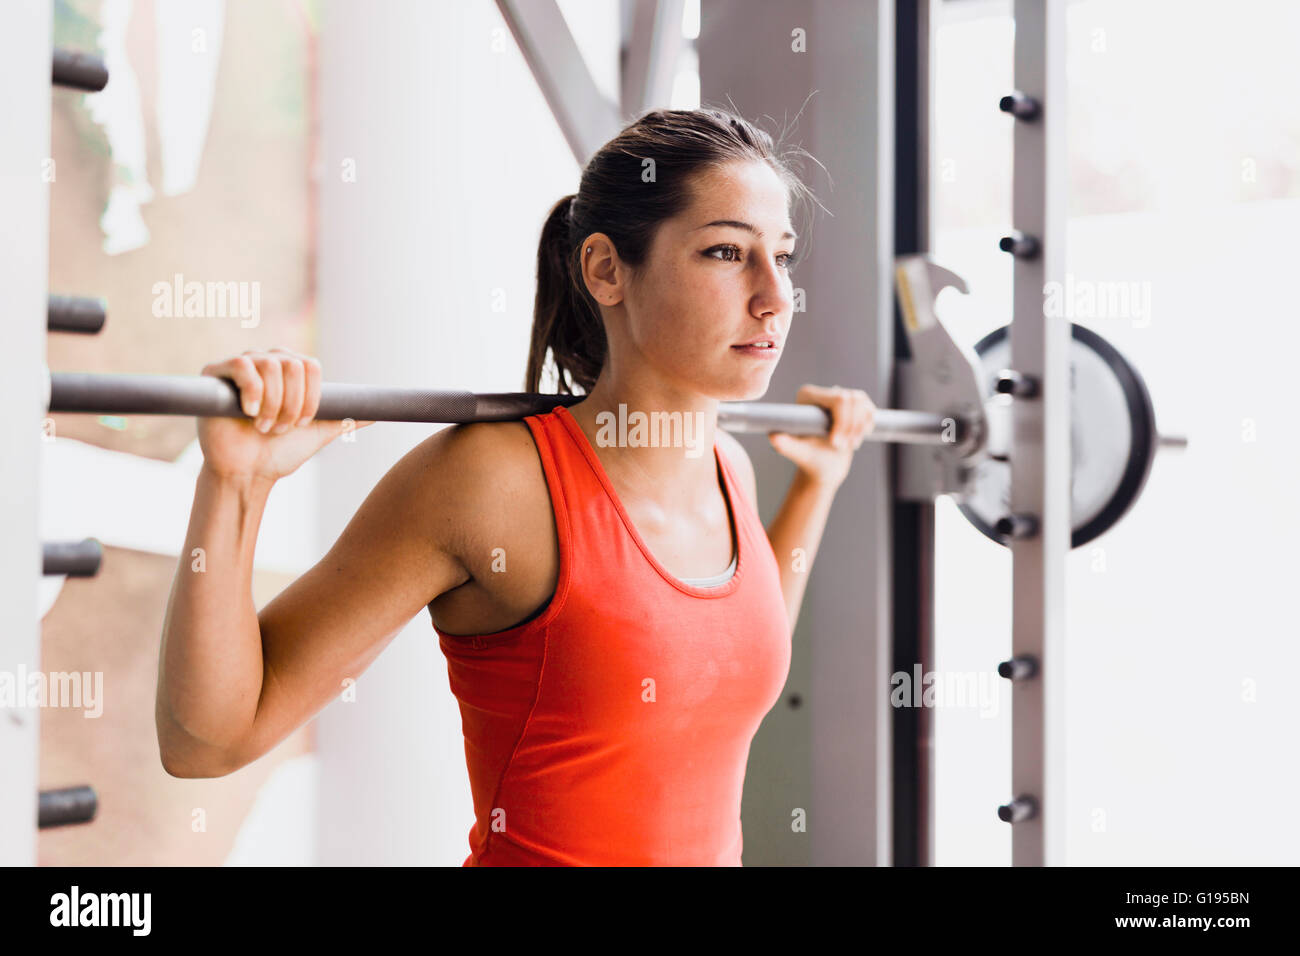 Focused young beautiful woman lifting weights in a gym Stock Photo